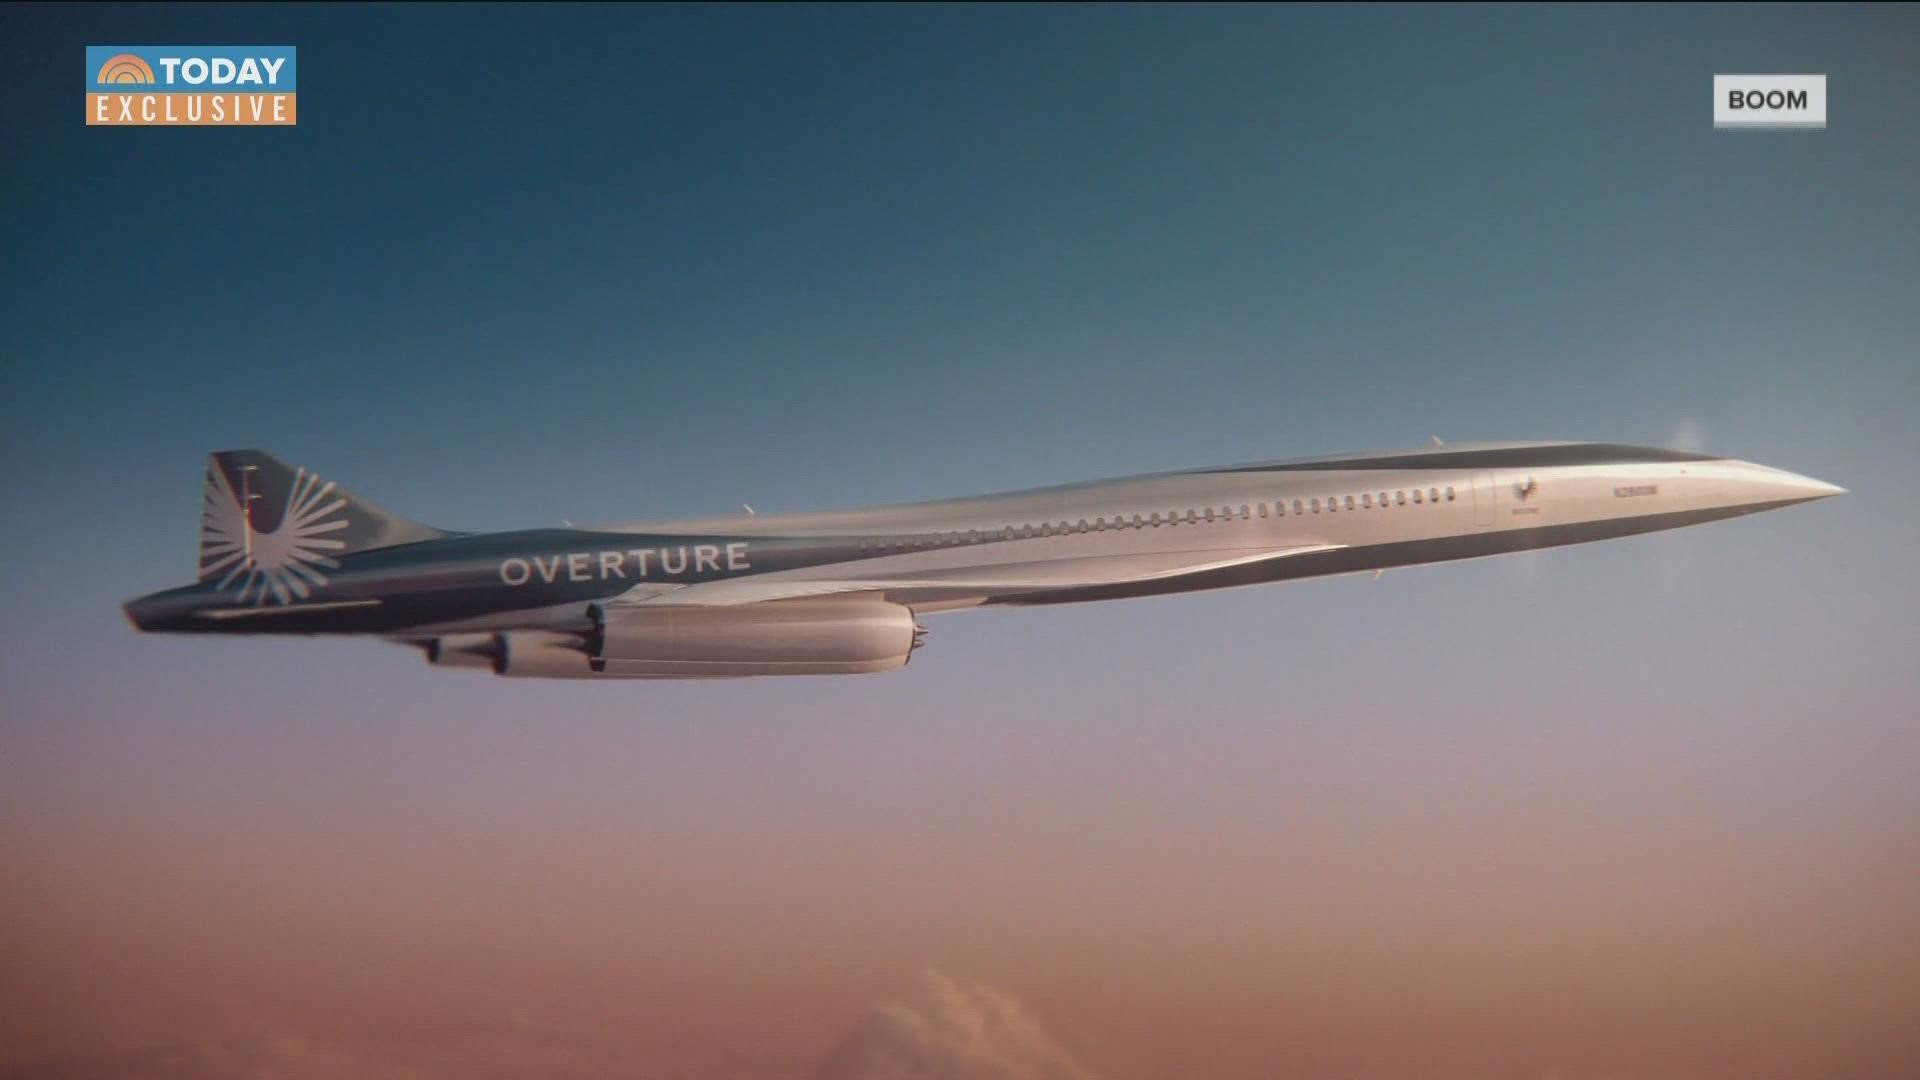 The supersonic planes will operate using 100% sustainable fuel sources, and would cut current flight times in half.